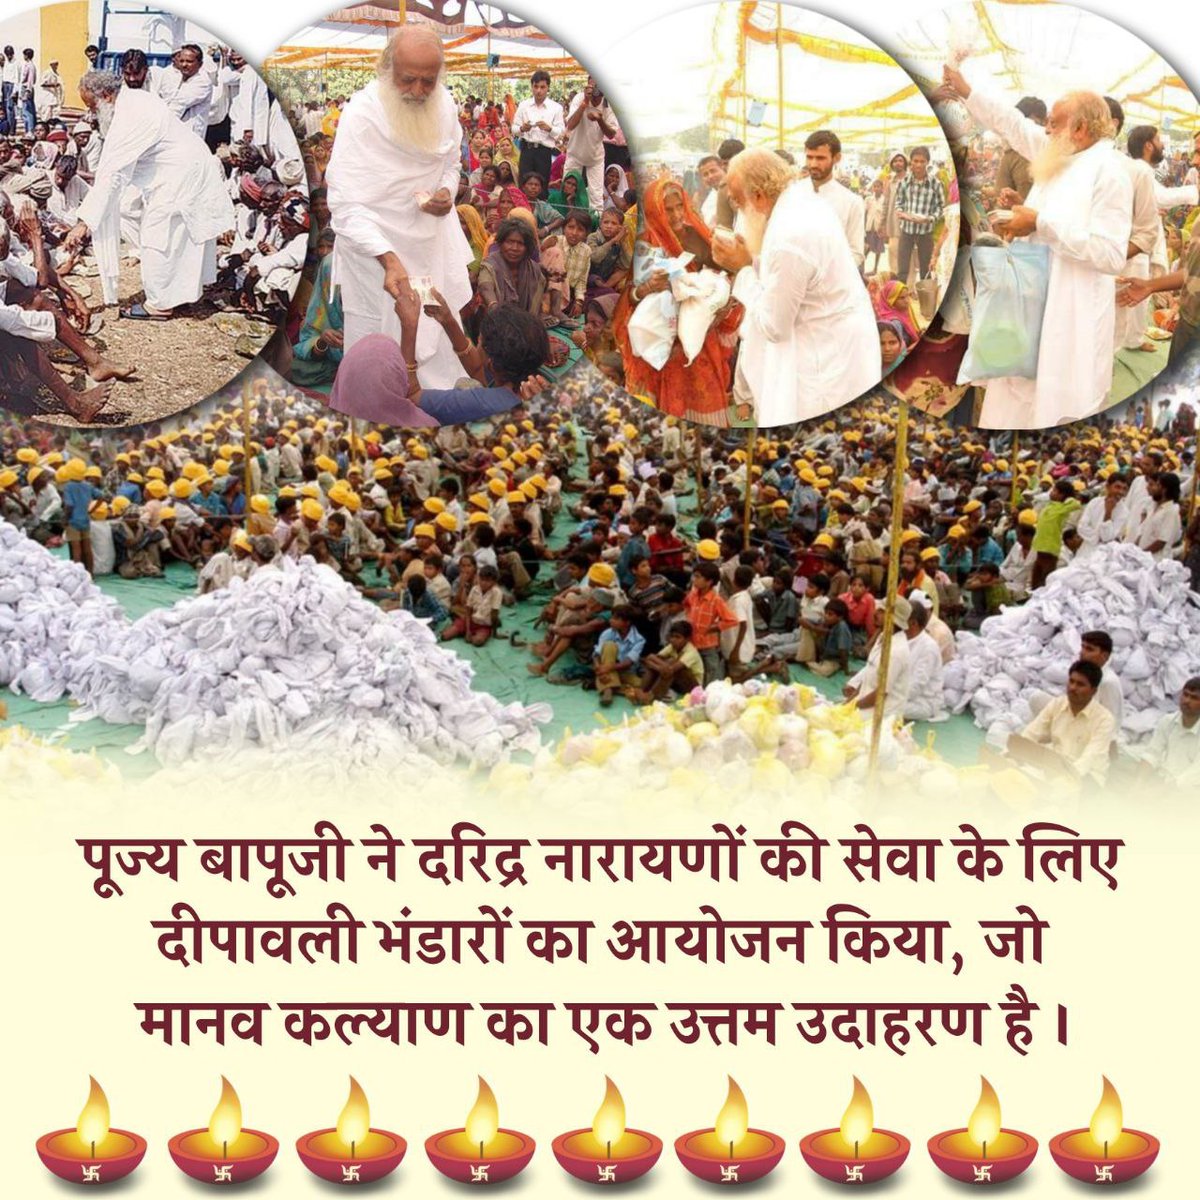 @YssSpeaks #प्राणिमात्र_के_हितैषी
Sant Shri Asharamji Bapu has devoted his 50+ years for welfare of society.

He started various programs for Younger generations so that they can succeed in there life.

He is a... 
Inspirational for Society